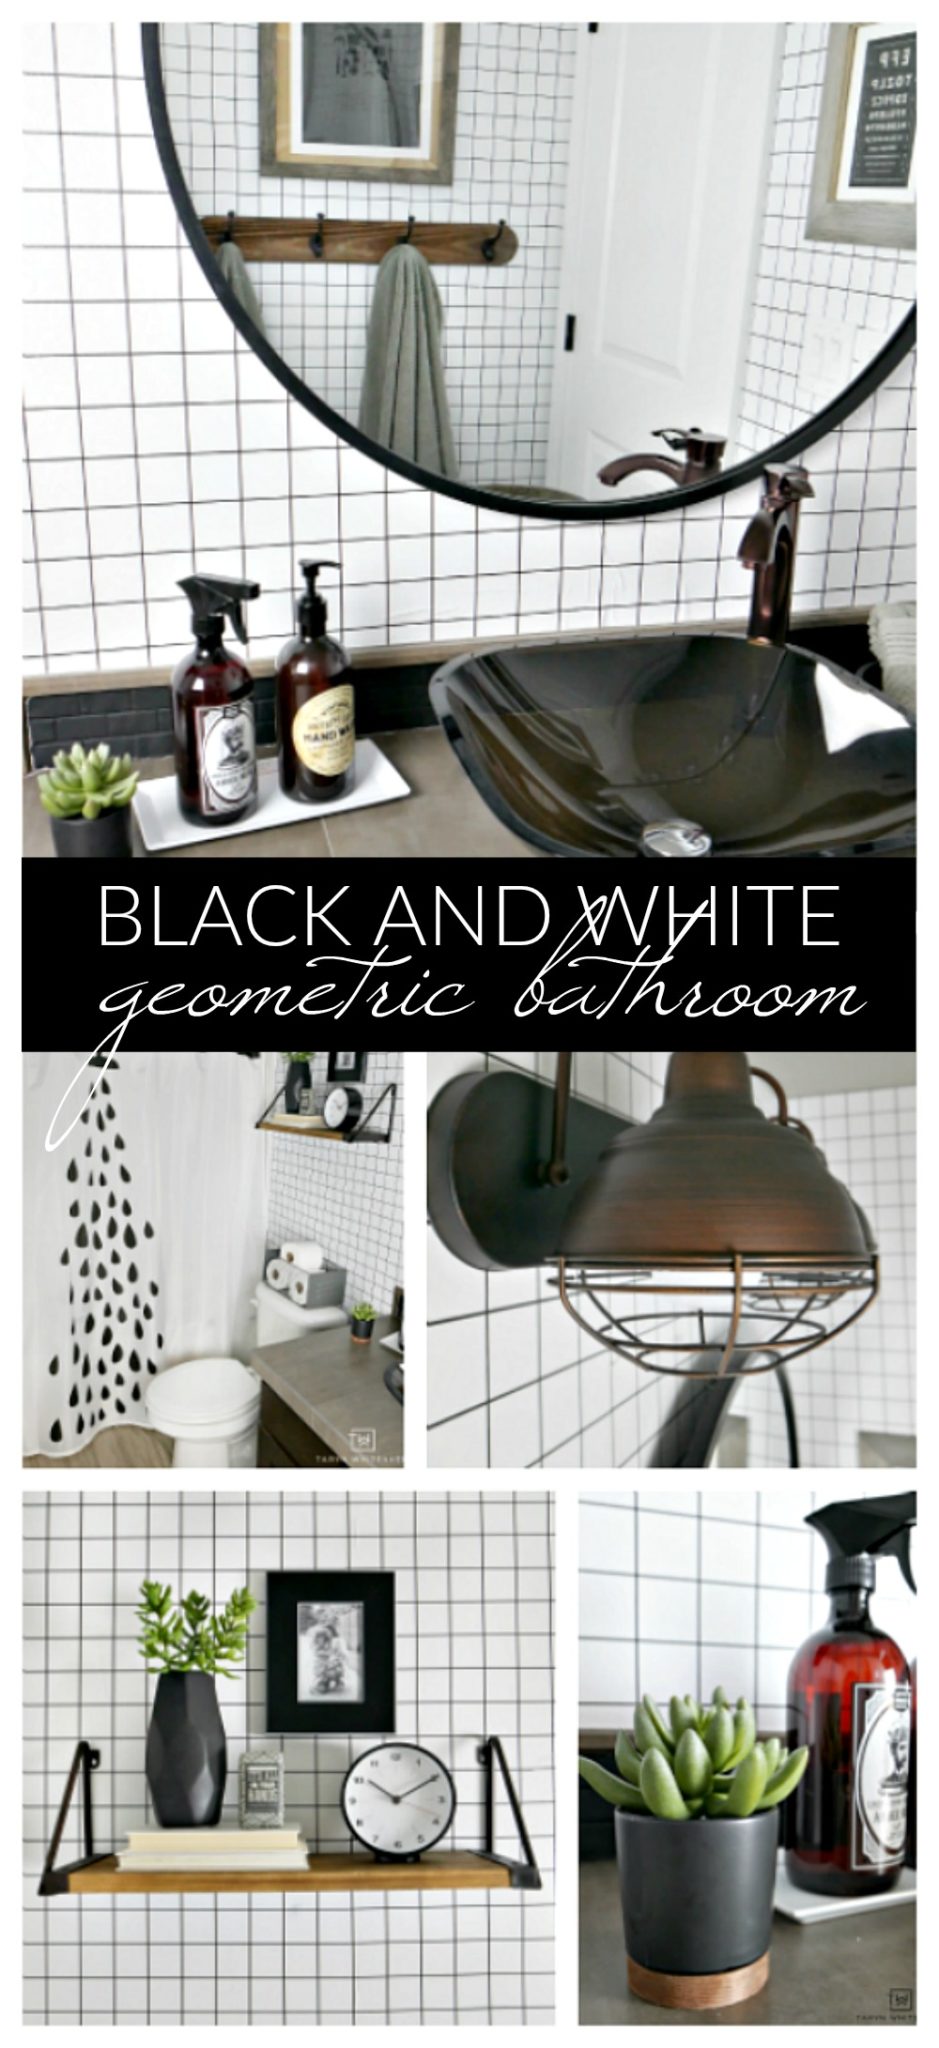 Easily transform you boring space into this black and white geometric bathroom using grid patterned wallpaper and modern industrial accents! Click for the before photos, you won't be disappointed!